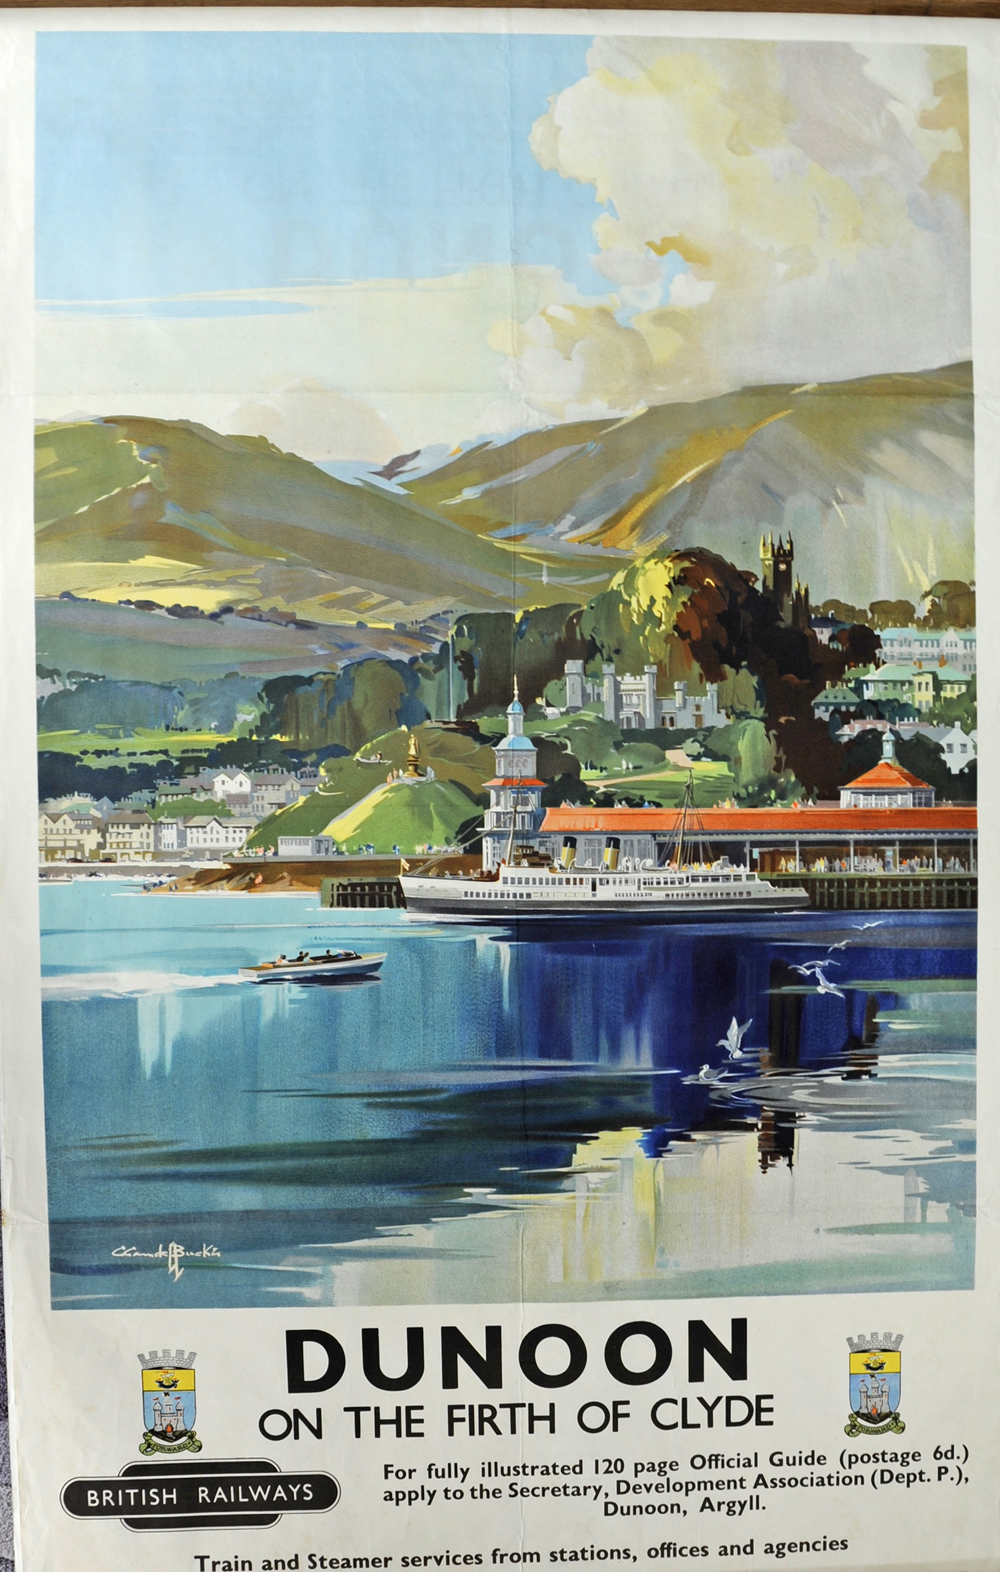 BR Poster "Dunoon - On the Firth of Clyde" by Claude Buckle, double royal size 40" x 25". A view